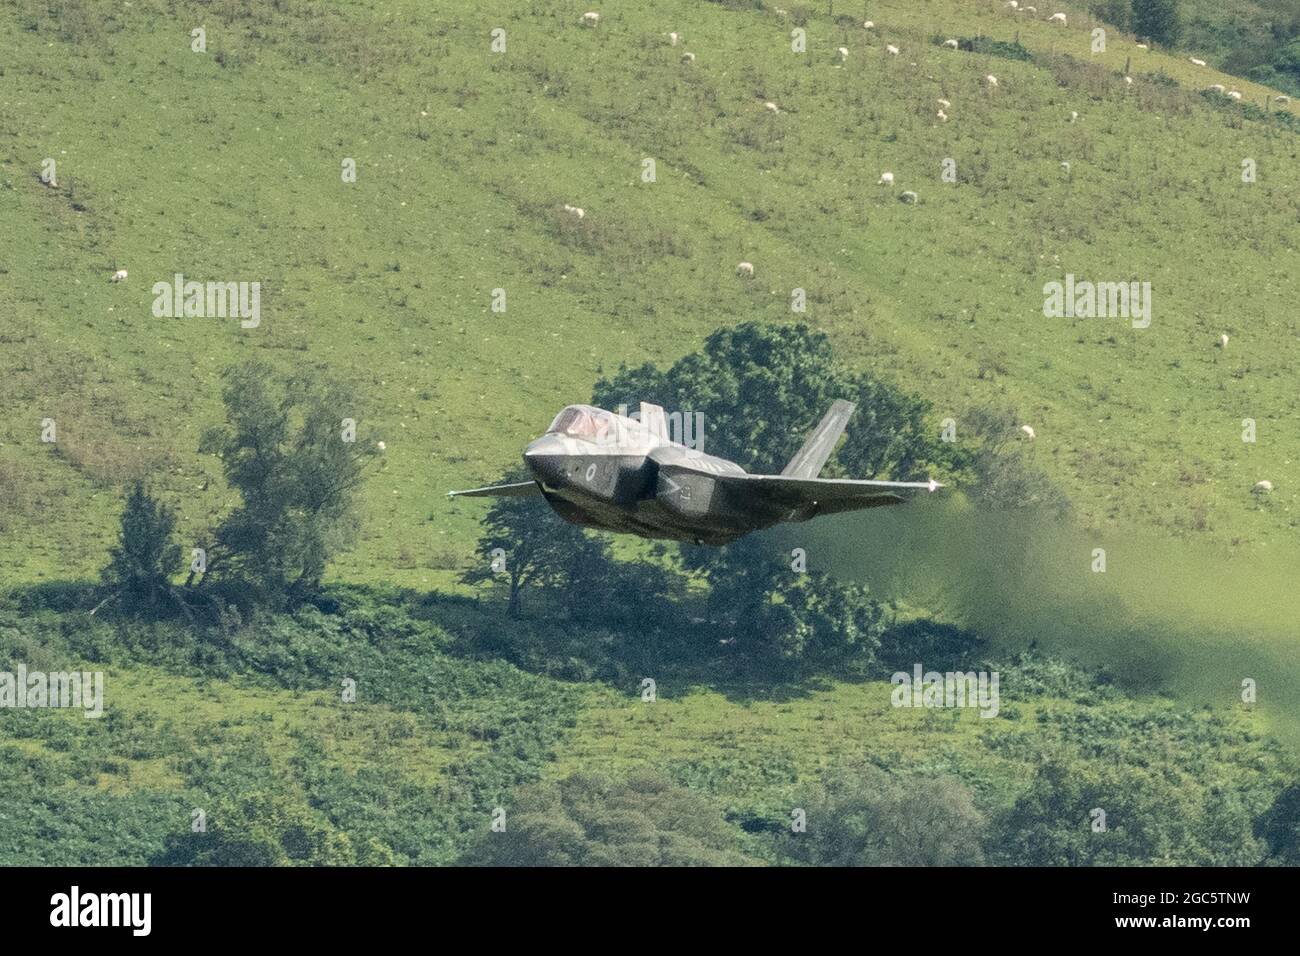 F35B Low level through the Mach Loop. Stock Photo